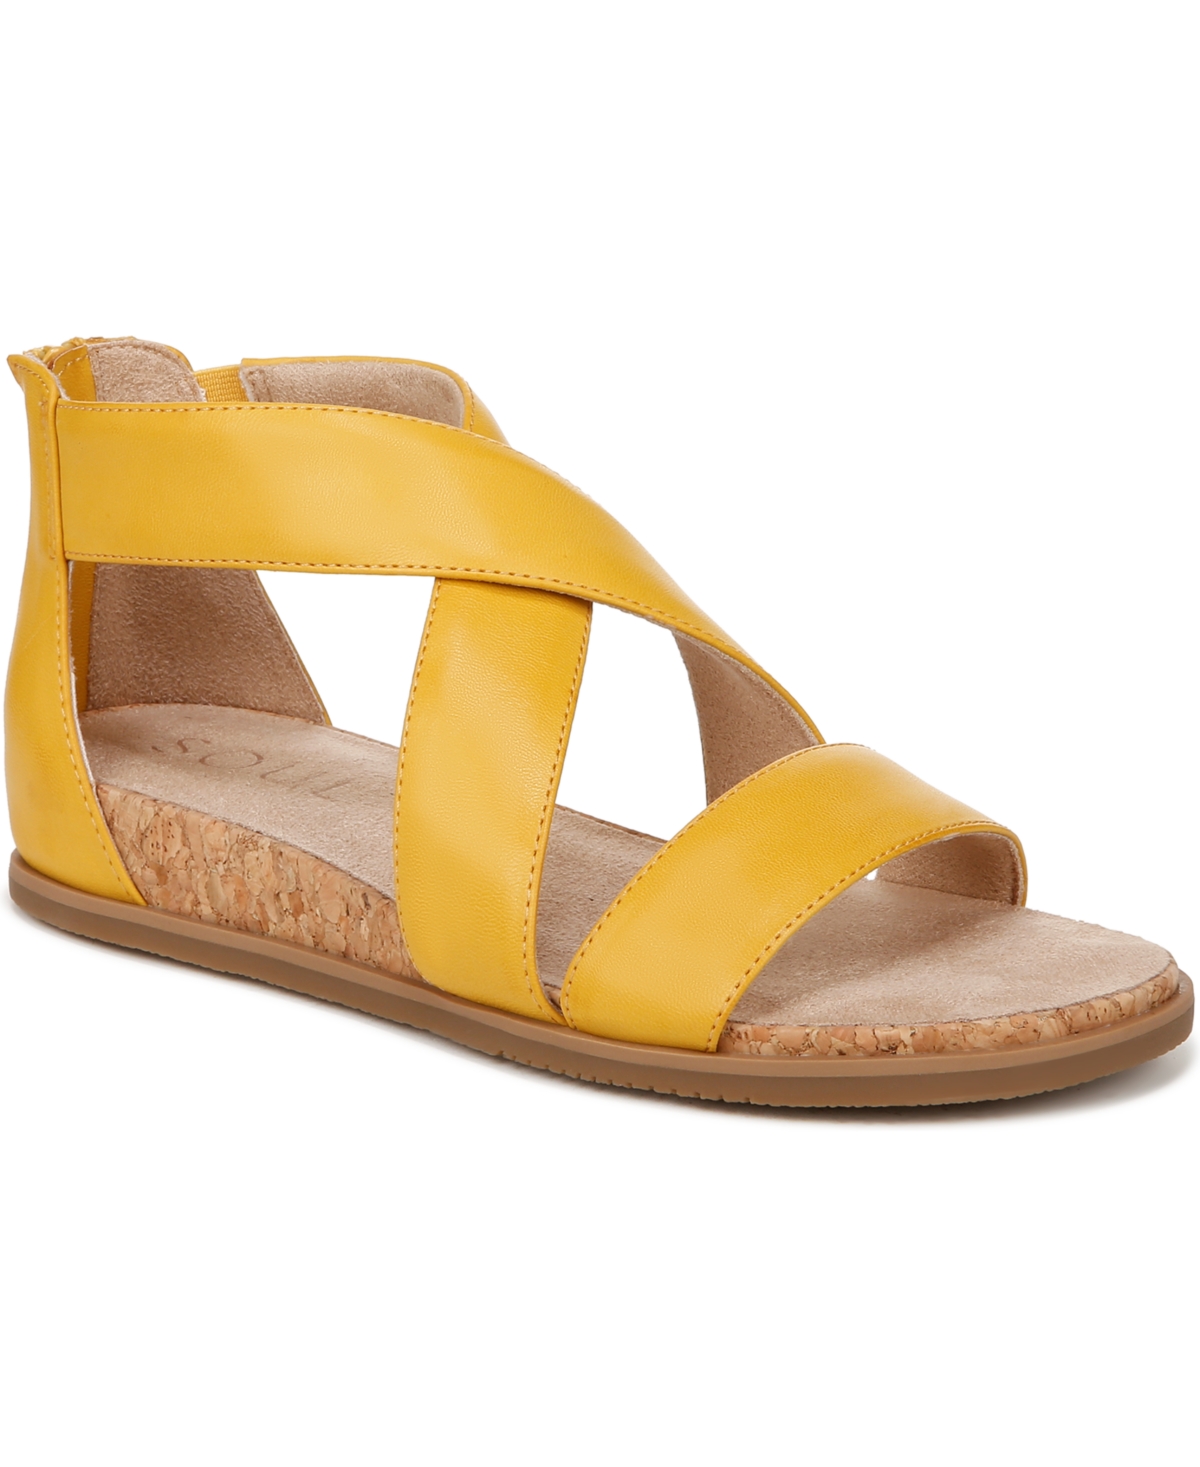 Cindi Strappy Sandals - Gold Metallic Faux Leather